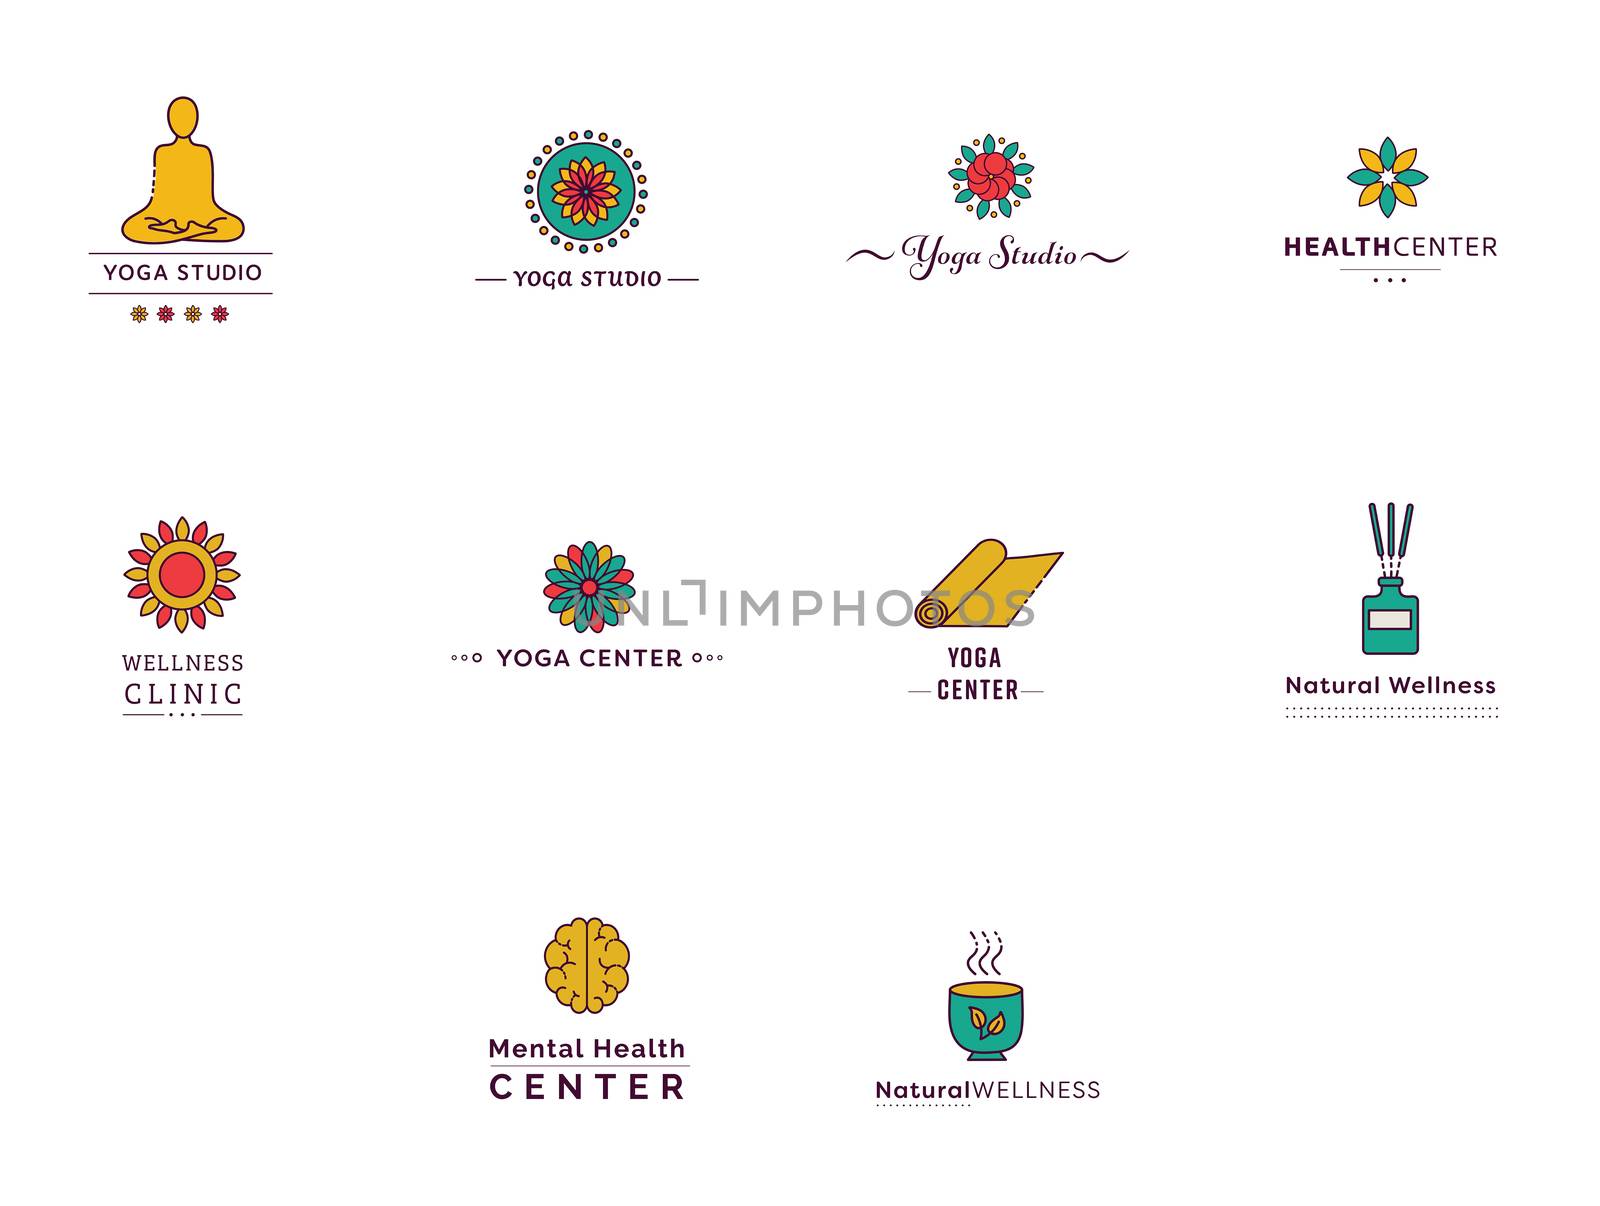 Various vectors icons of yoga and fitness centers by Wavebreakmedia